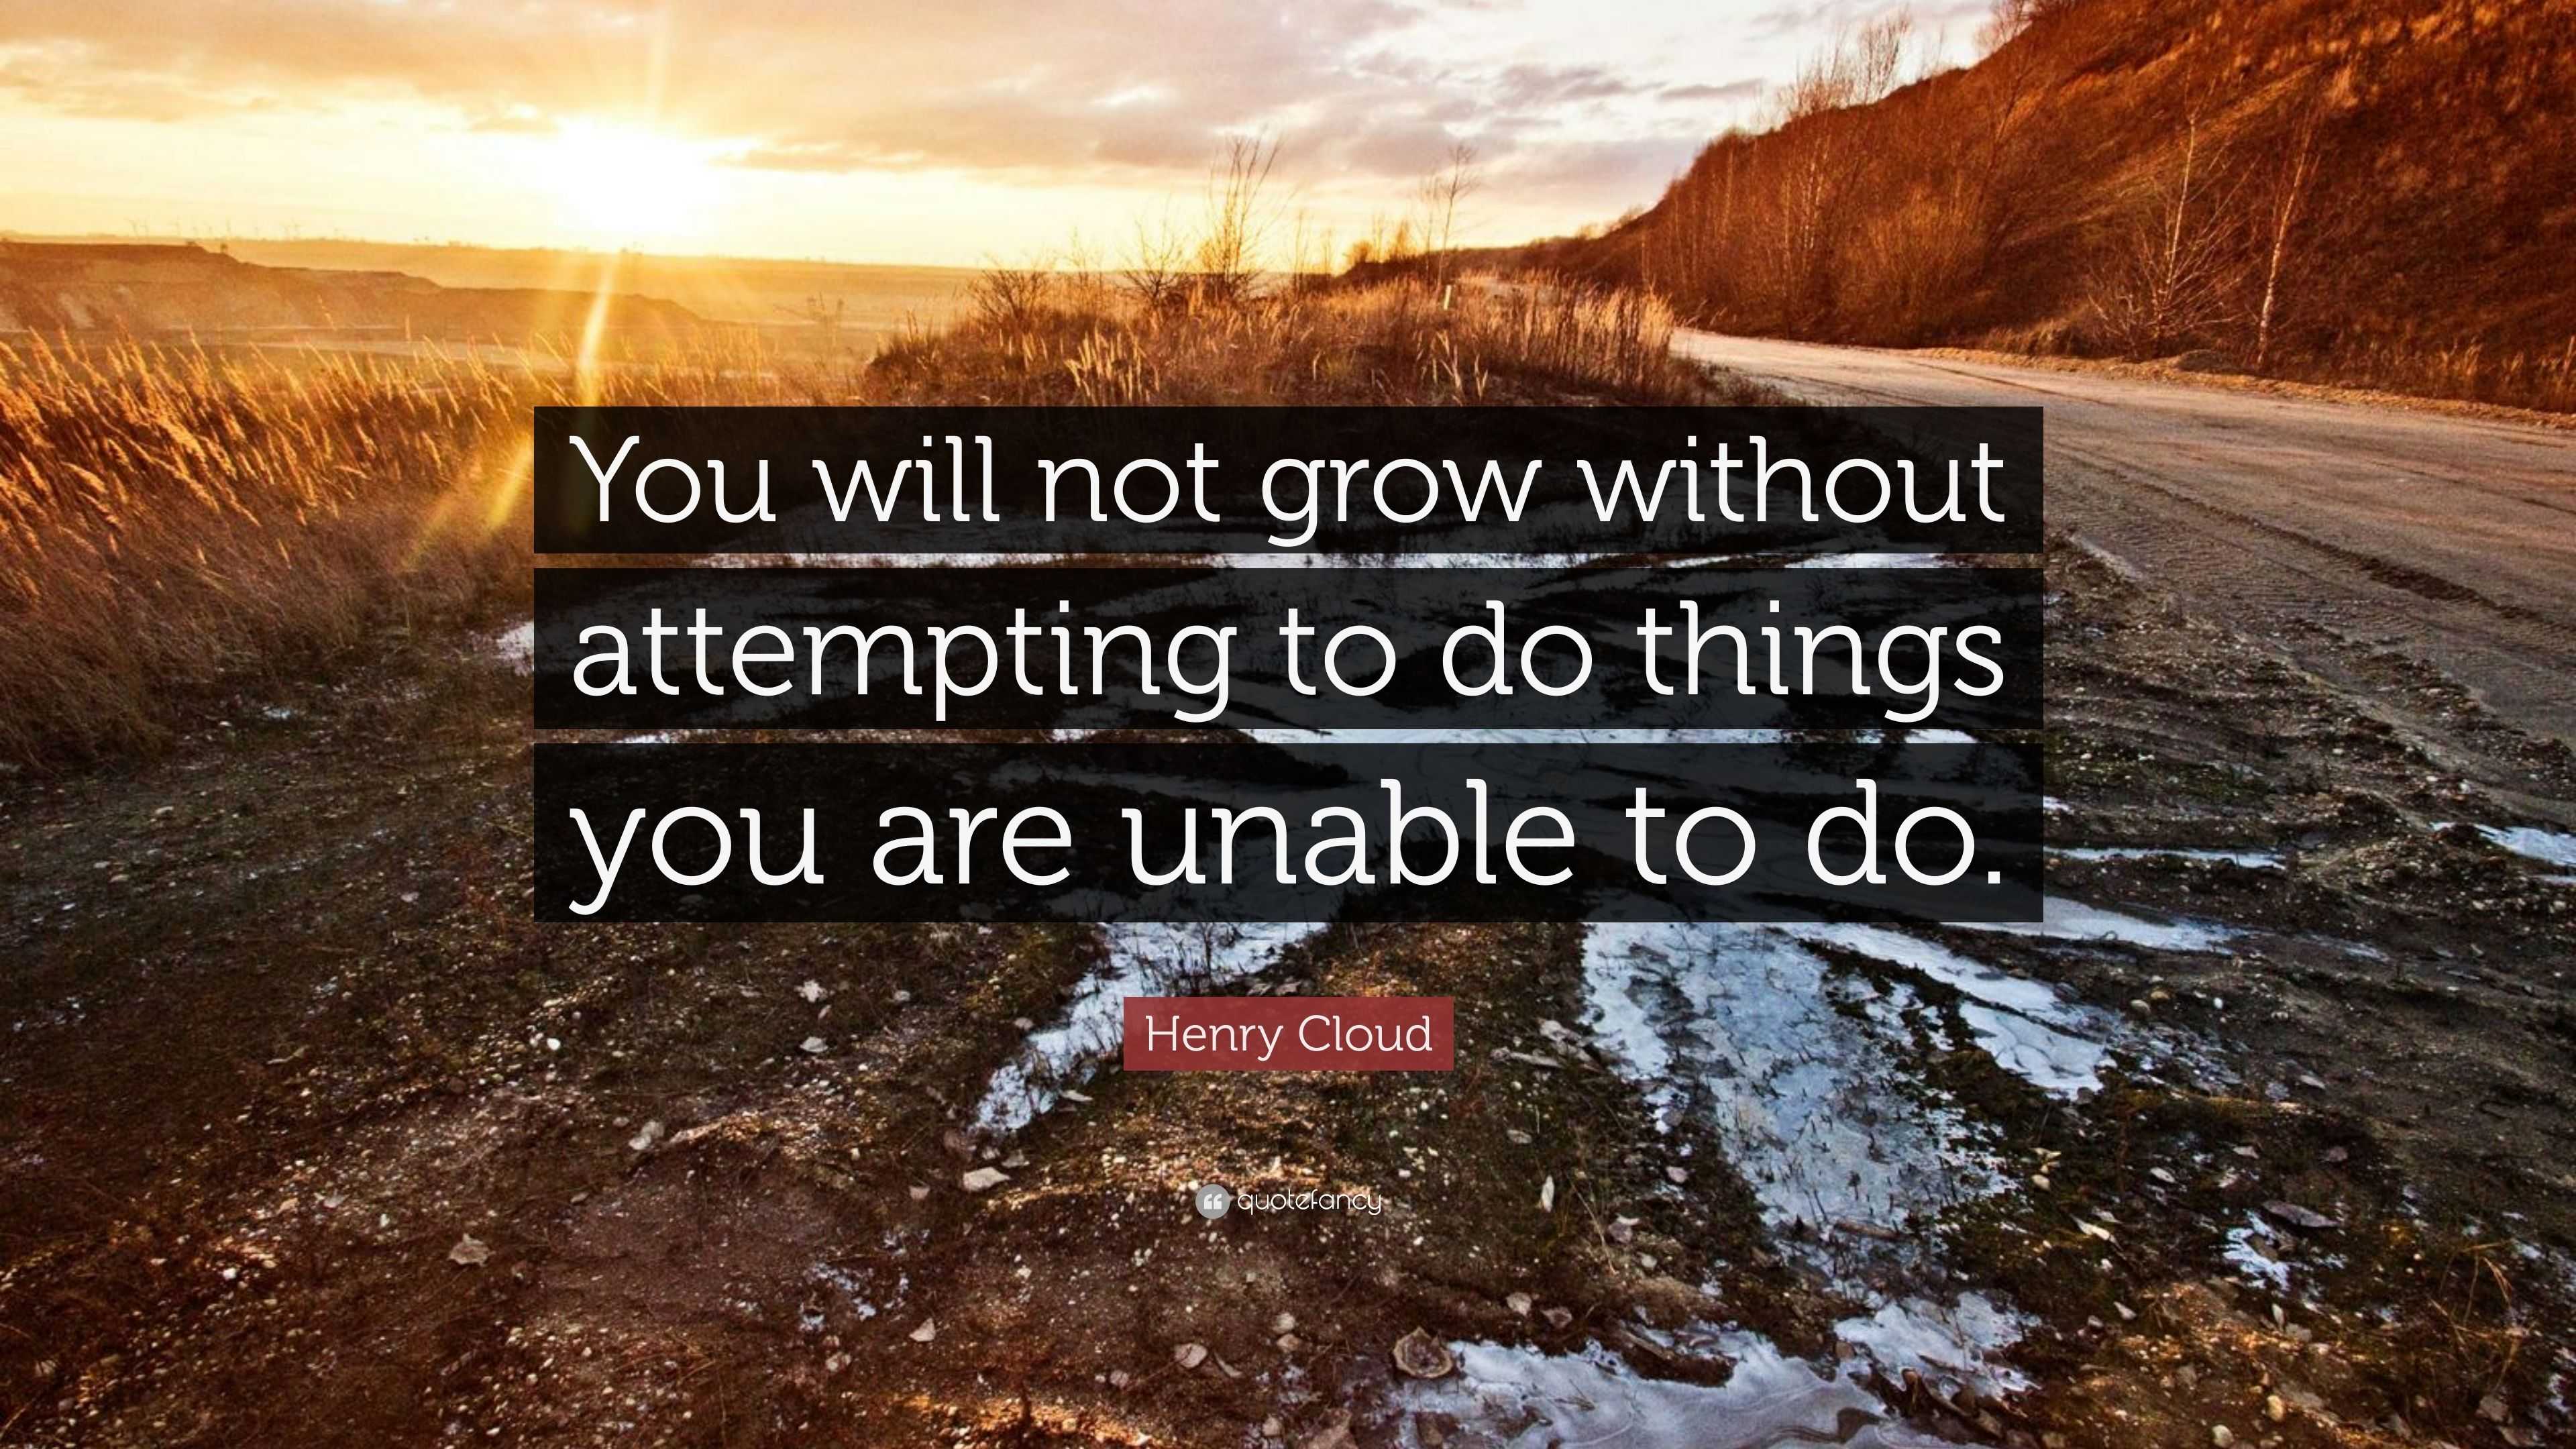 Henry Cloud Quote: “You will not grow without attempting to do things ...